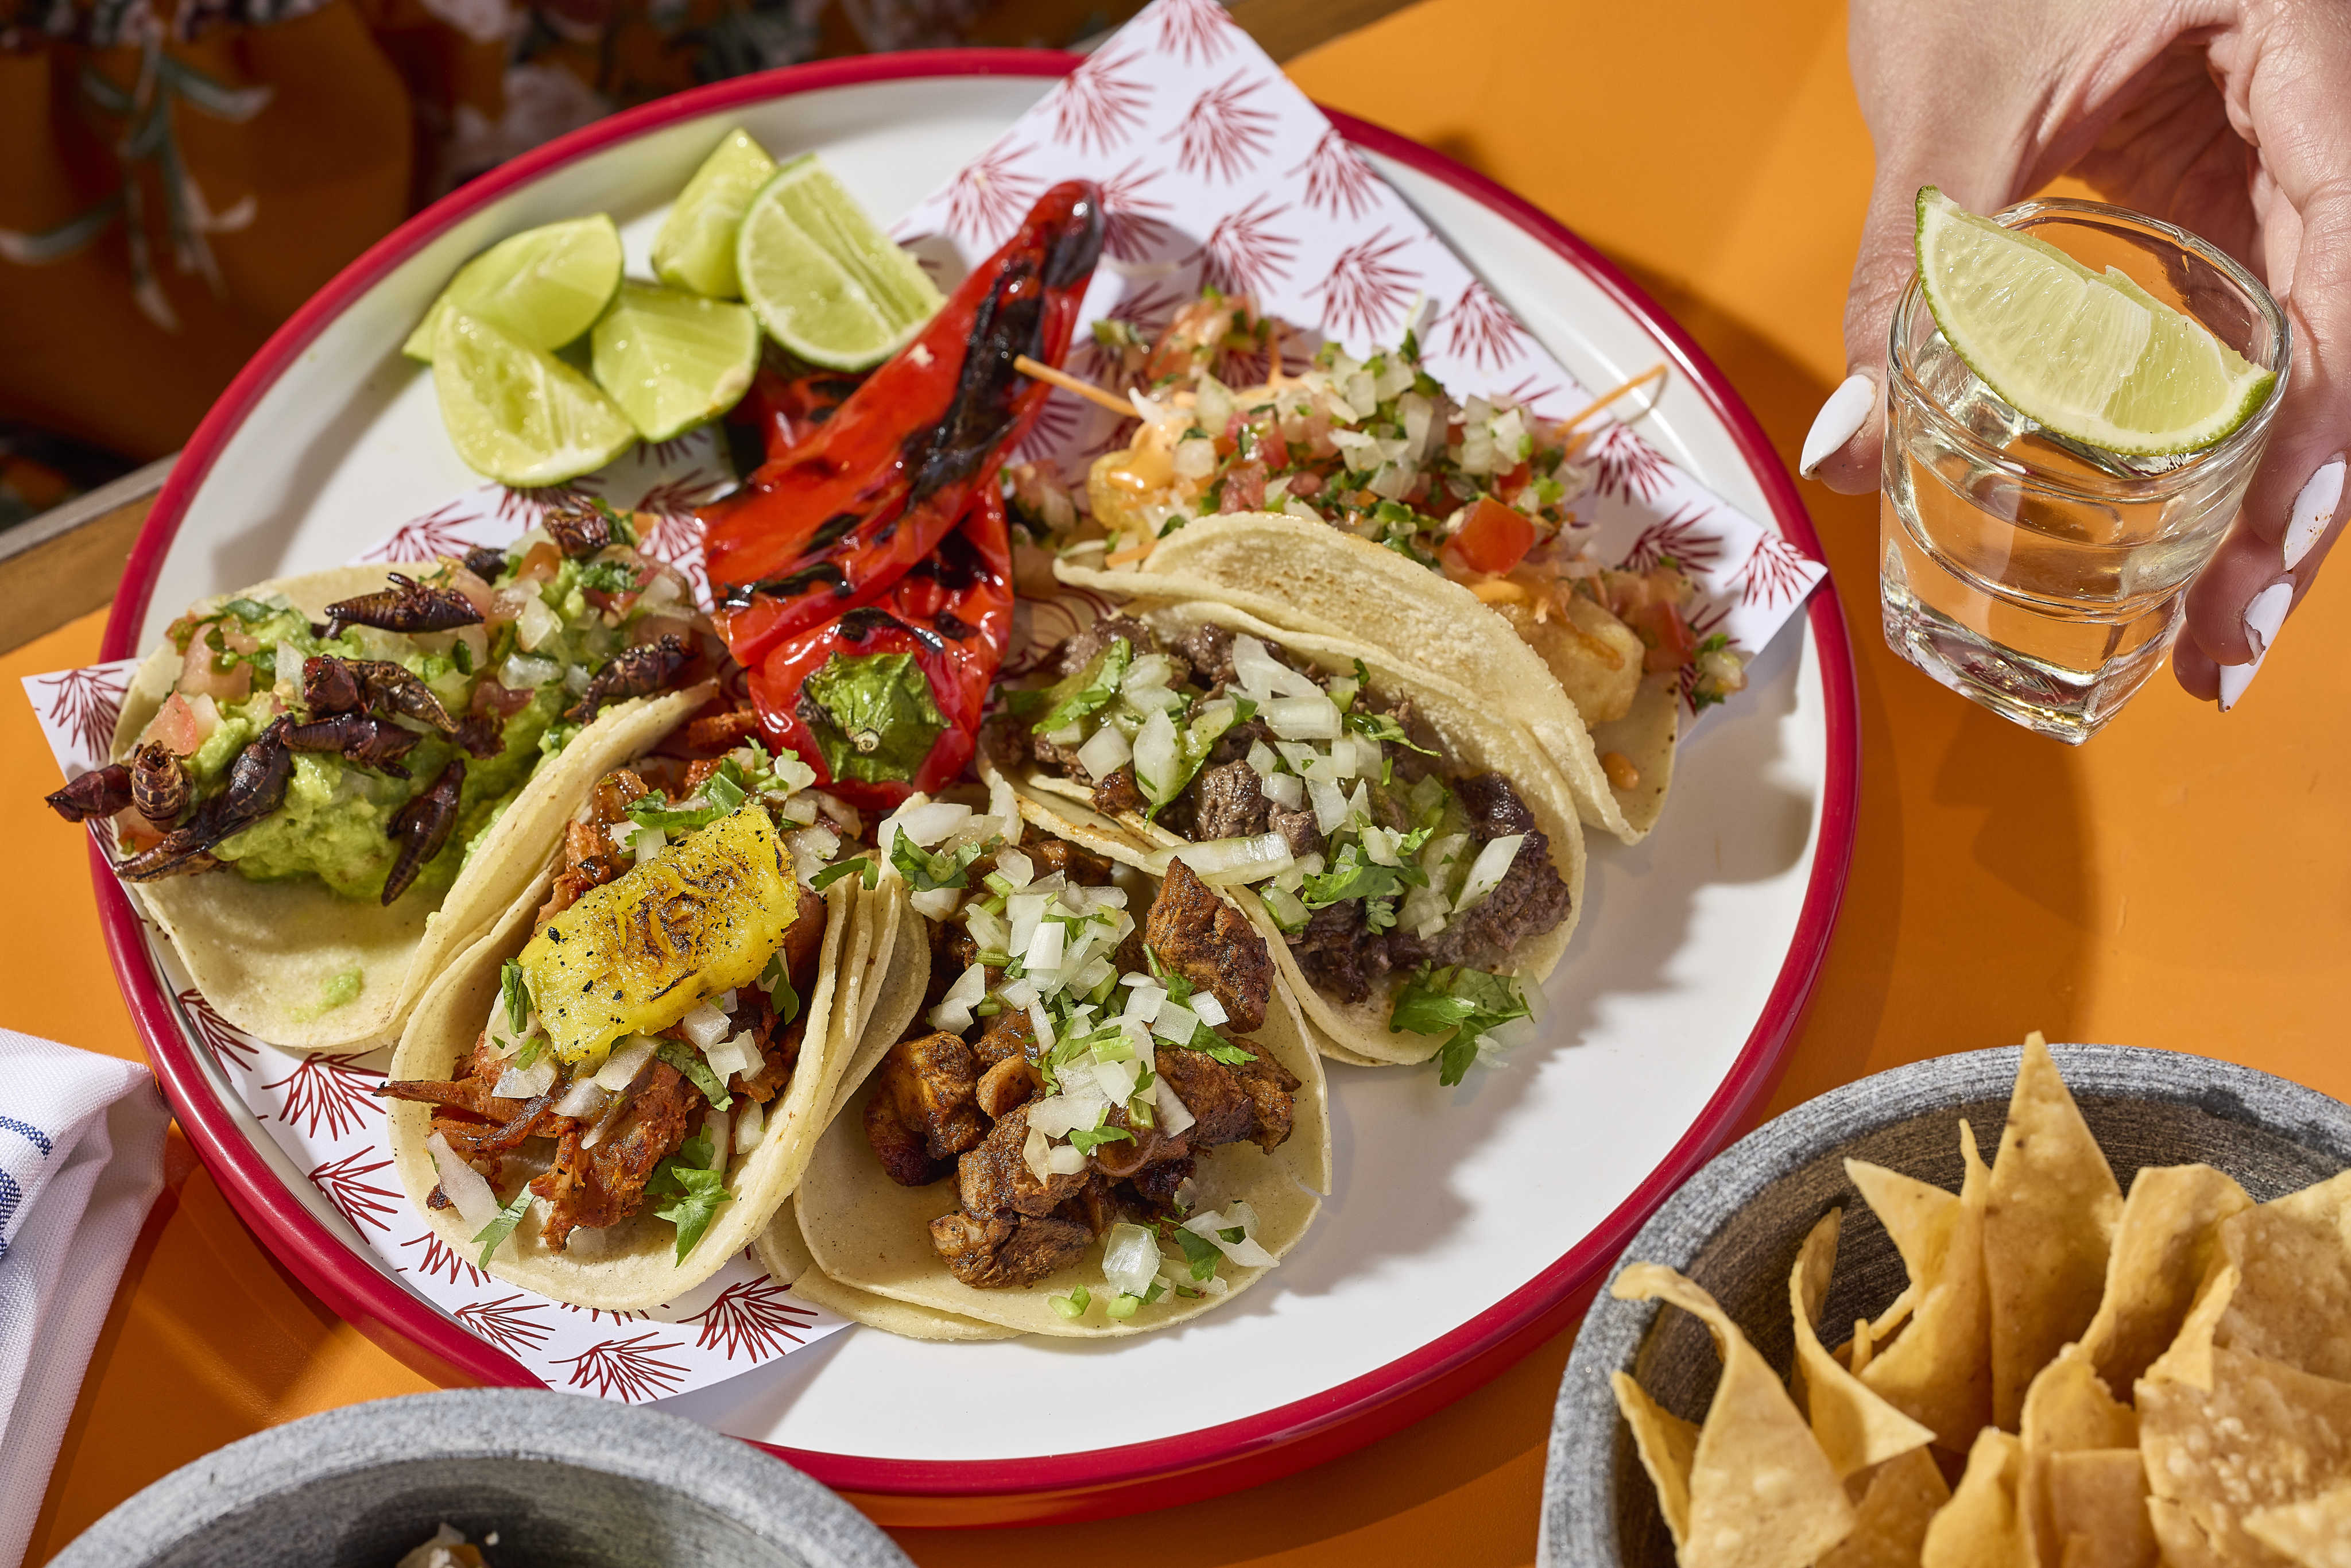 A selection of tacos at El Taquero, a Hong Kong restaurant where Mexico native Yamilette Cano goes for a taste of home. The entrepreneur also shares her top Japanese, Sichuan and dim sum picks. Photo: El Taquero